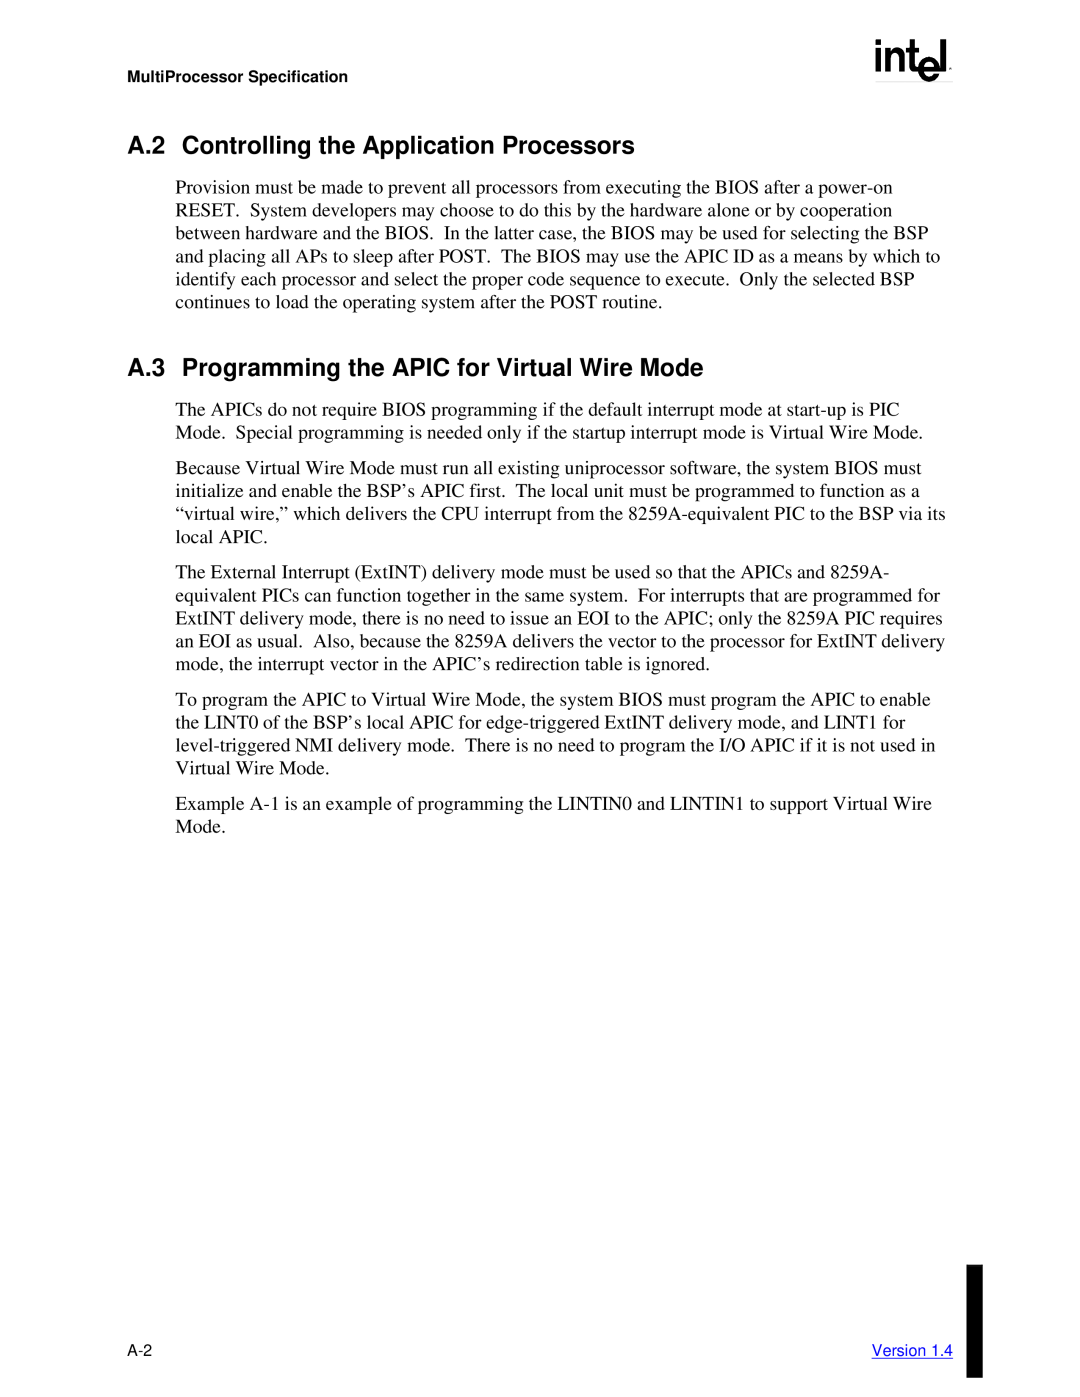 Intel MultiProcessor manual A.2 Controlling the Application Processors, A.3 Programming the APIC for Virtual Wire Mode 